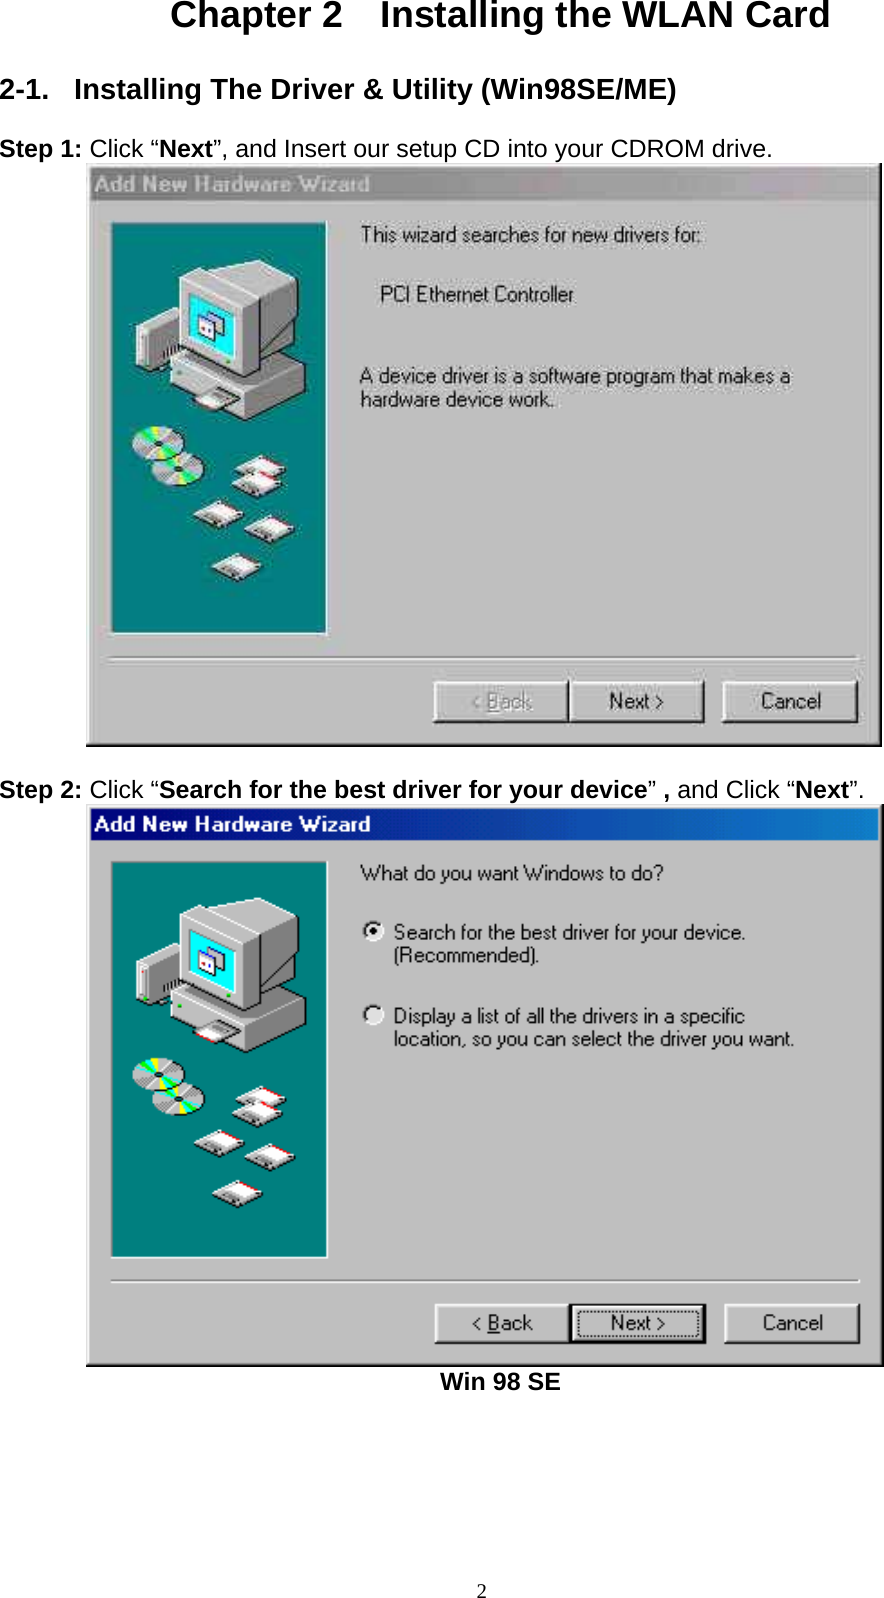 2  Chapter 2    Installing the WLAN Card  2-1.  Installing The Driver &amp; Utility (Win98SE/ME)  Step 1: Click “Next”, and Insert our setup CD into your CDROM drive.           Step 2: Click “Search for the best driver for your device” , and Click “Next”.          Win 98 SE 